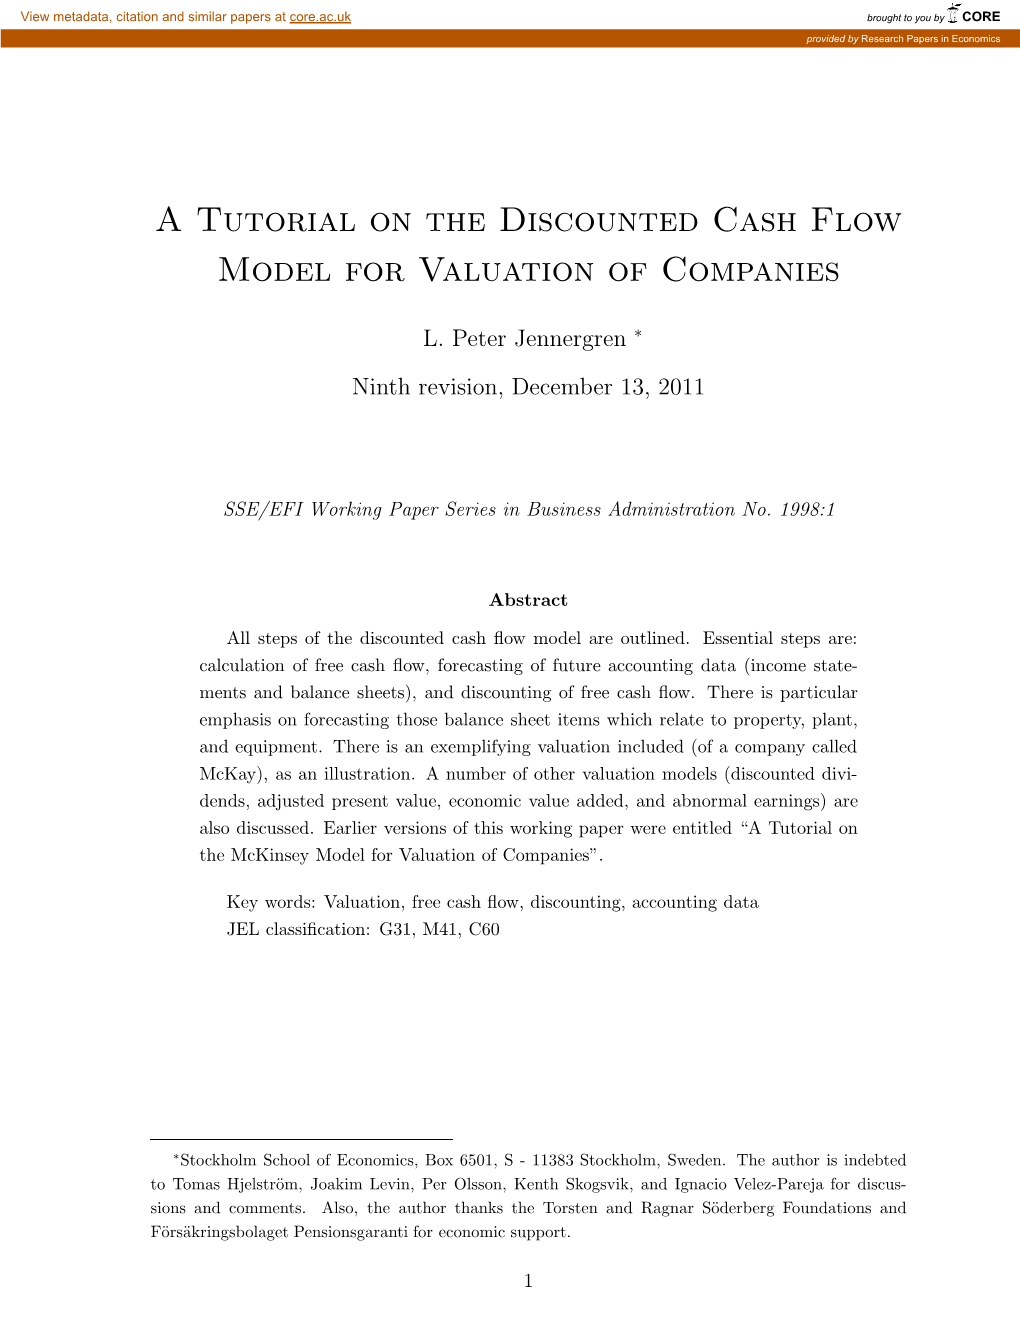 A Tutorial on the Discounted Cash Flow Model for Valuation of Companies